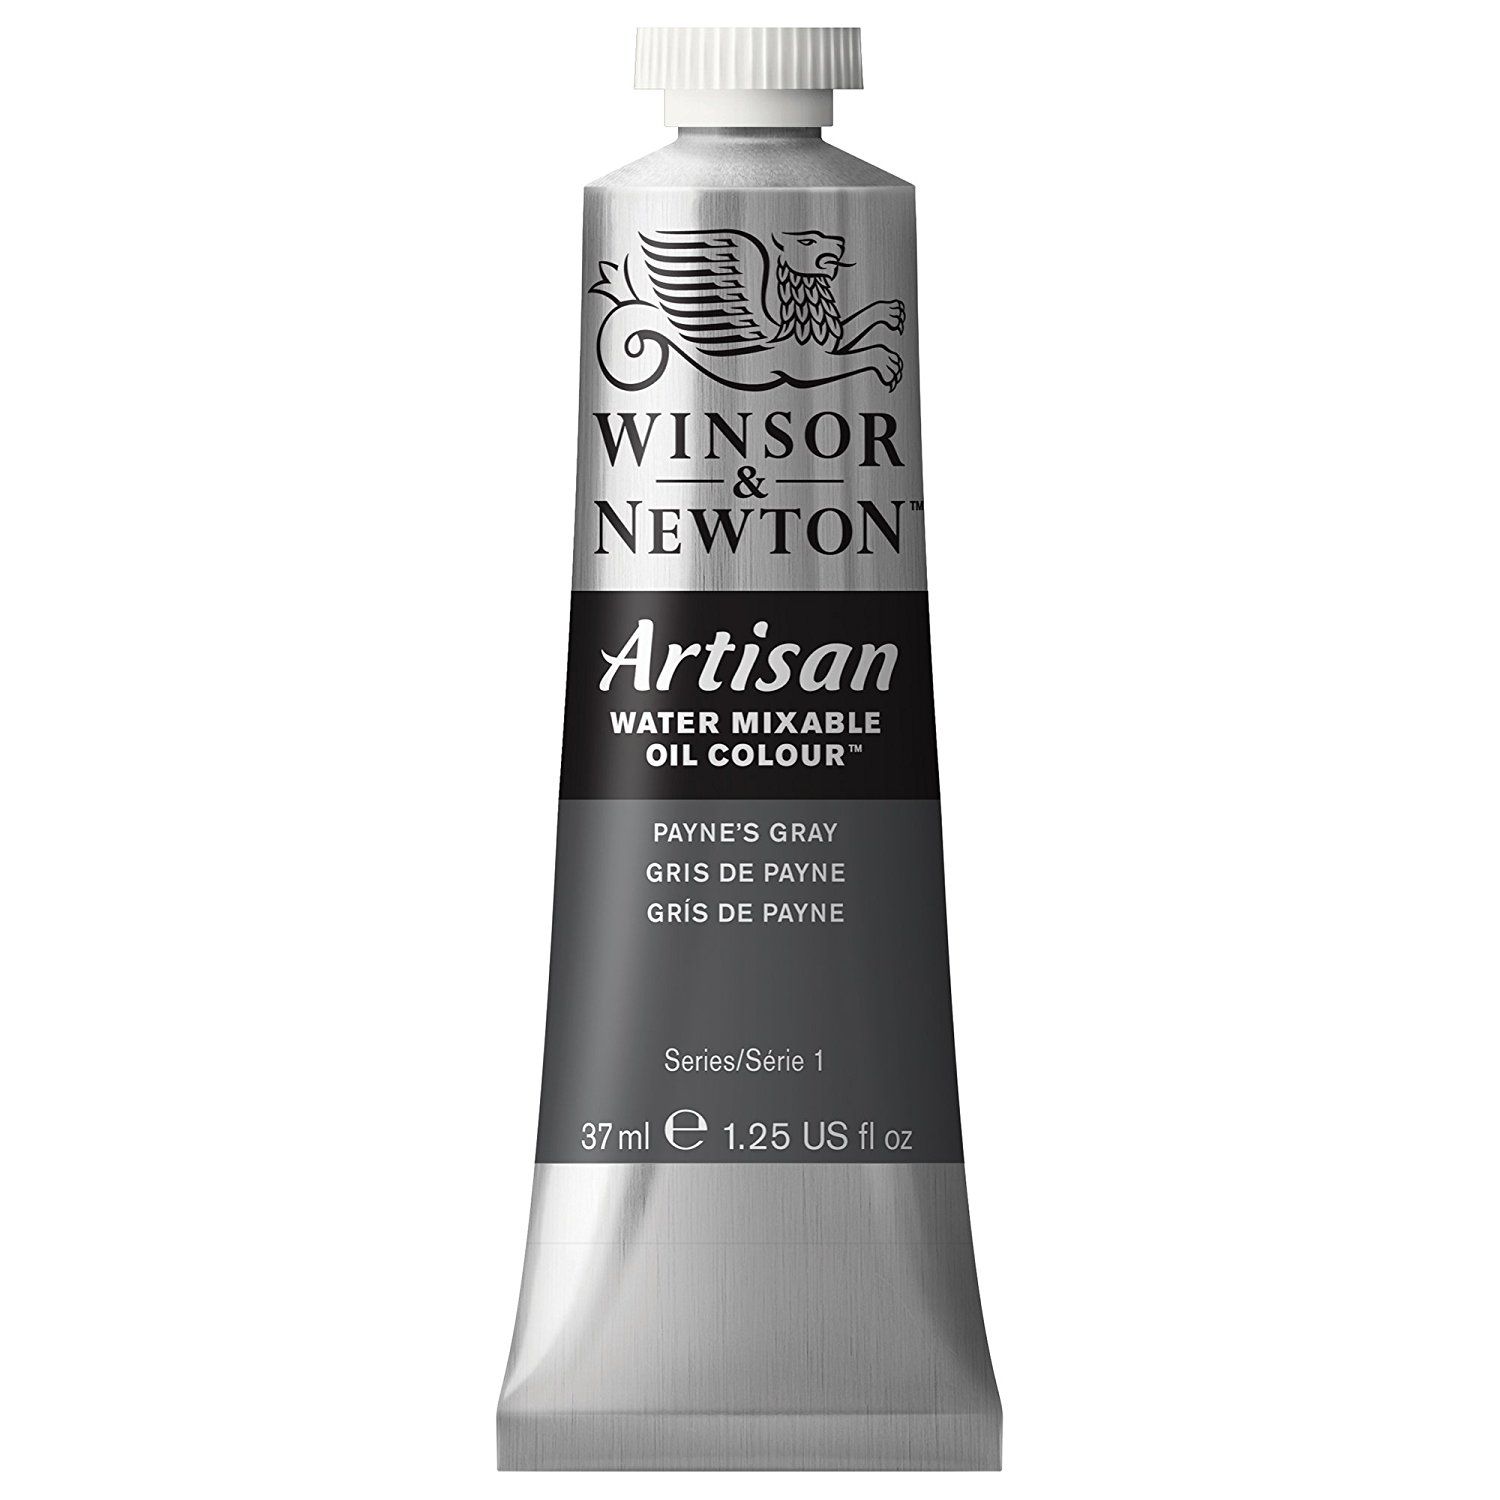 Artisan Water Mixable Oil - Payne's Gray 37ml